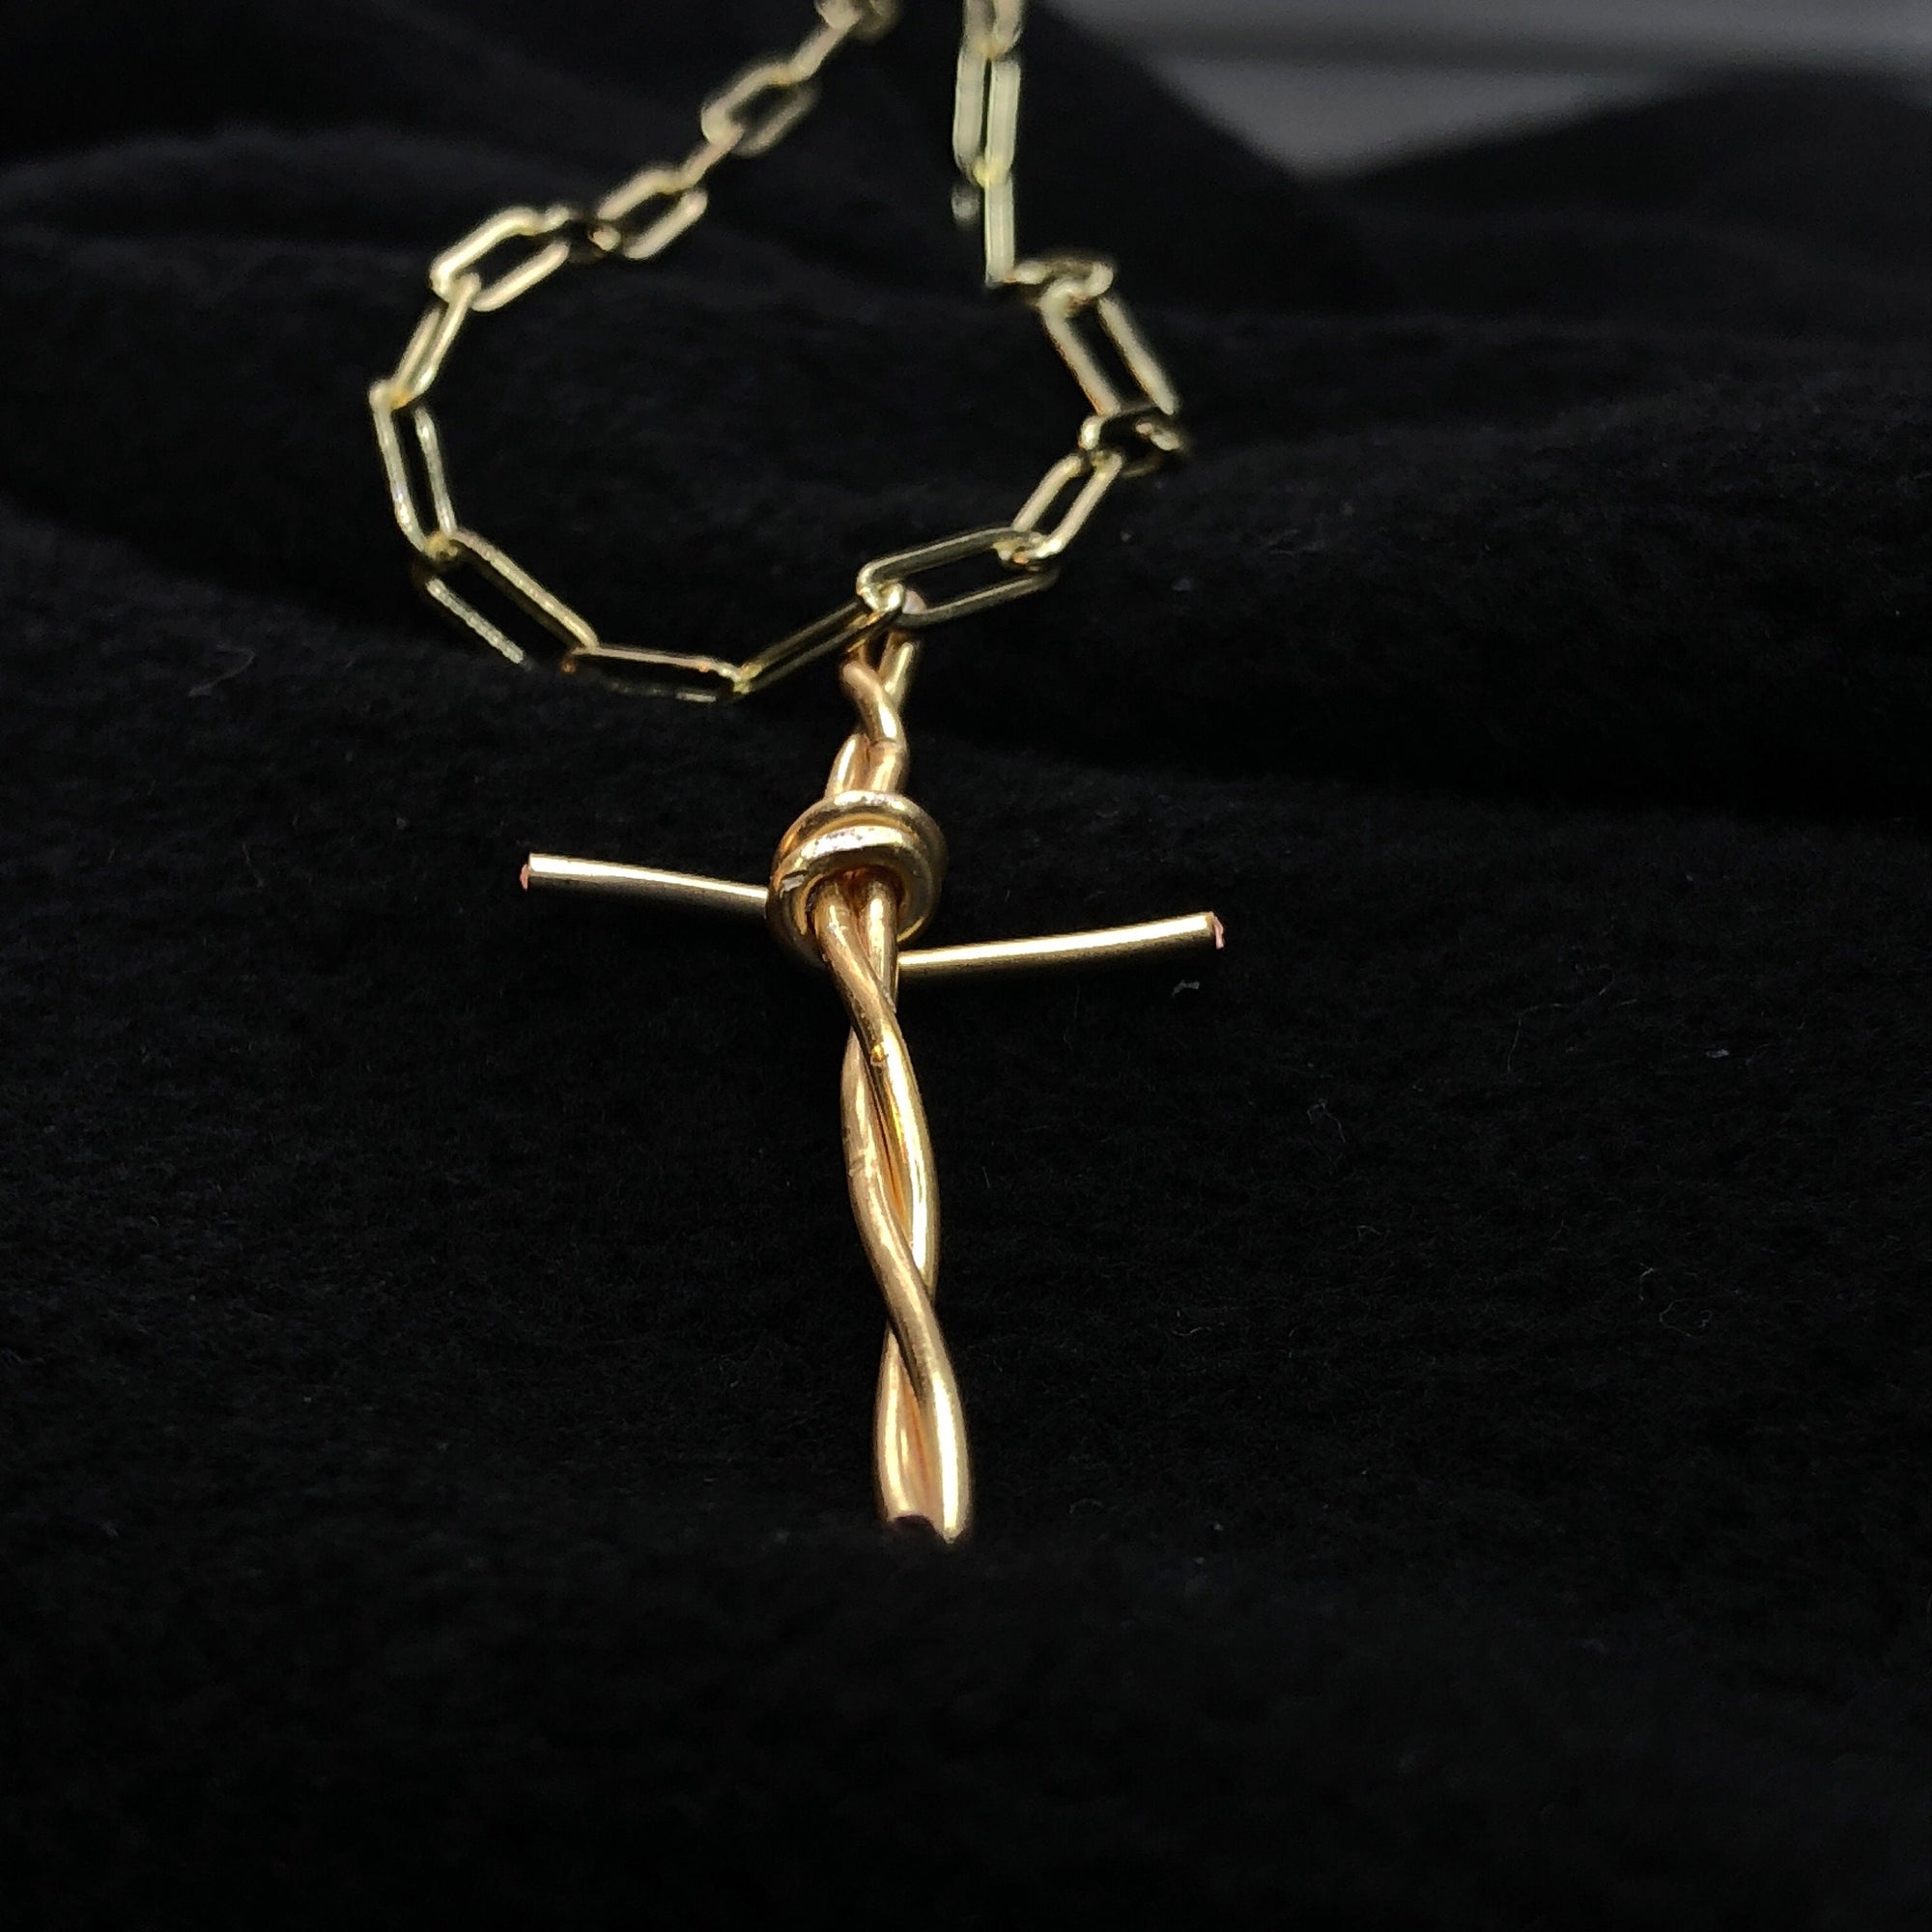 Rustic primitive style cross necklace for men • Gold, modern cross pendant christian jewelry • Silver cross faith jewelry